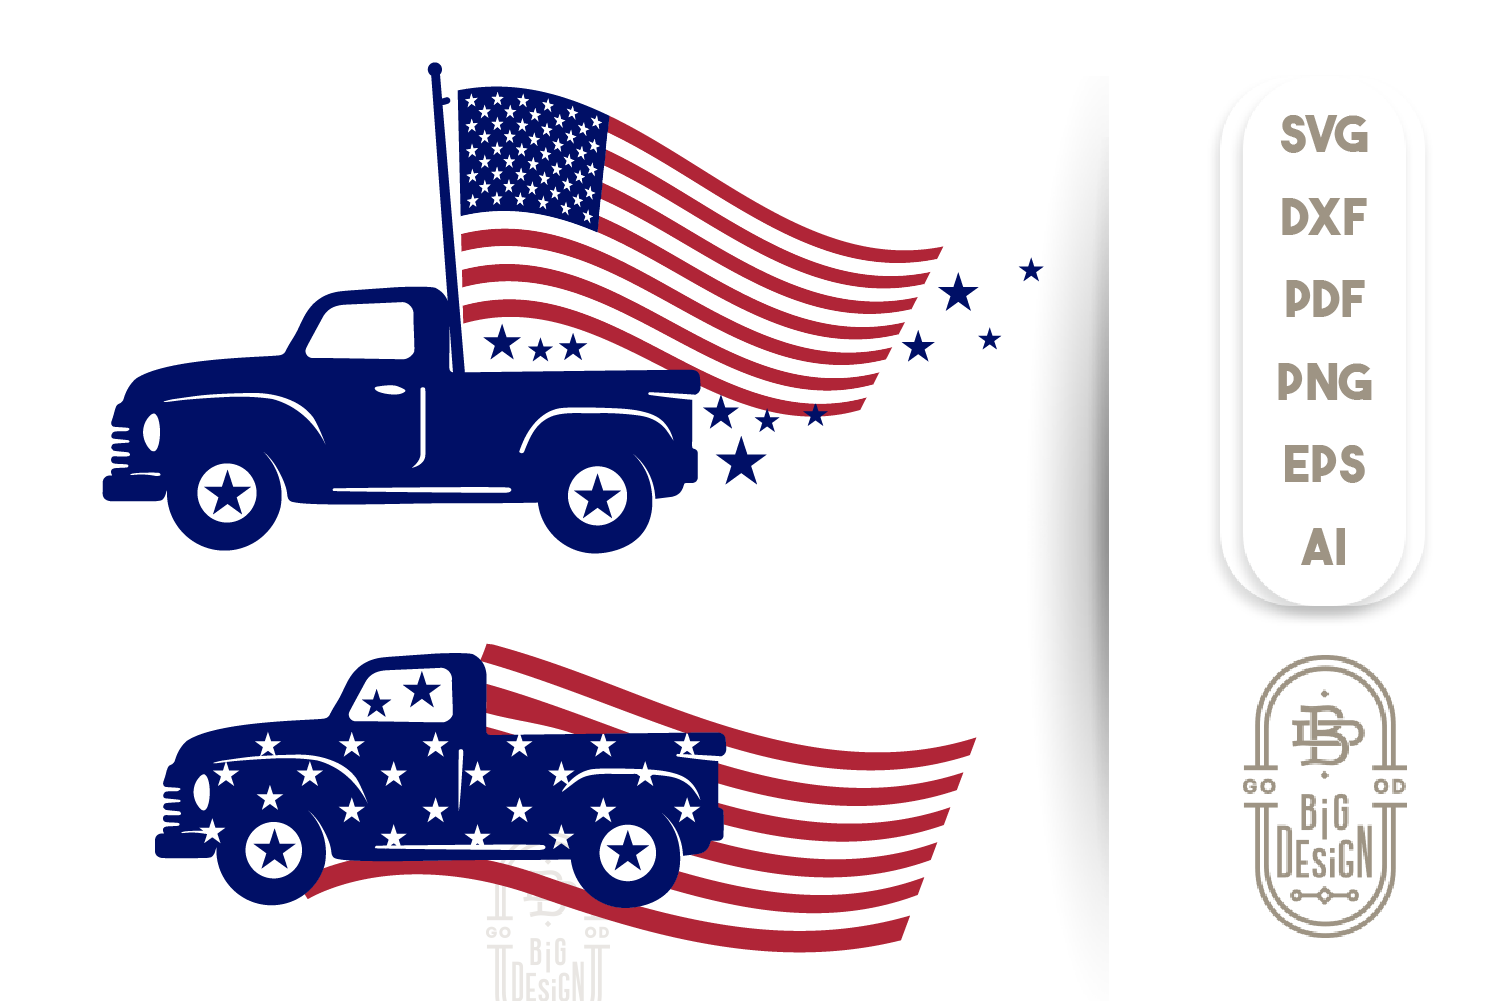 Download Door Hanger Retro Truck Svg 4th Of July Truck Svg Cricut Svg Silhouette Svg Truck Attachment Svg Svg Files 4th Of July Sign Clip Art Art Collectibles Commentfer Fr